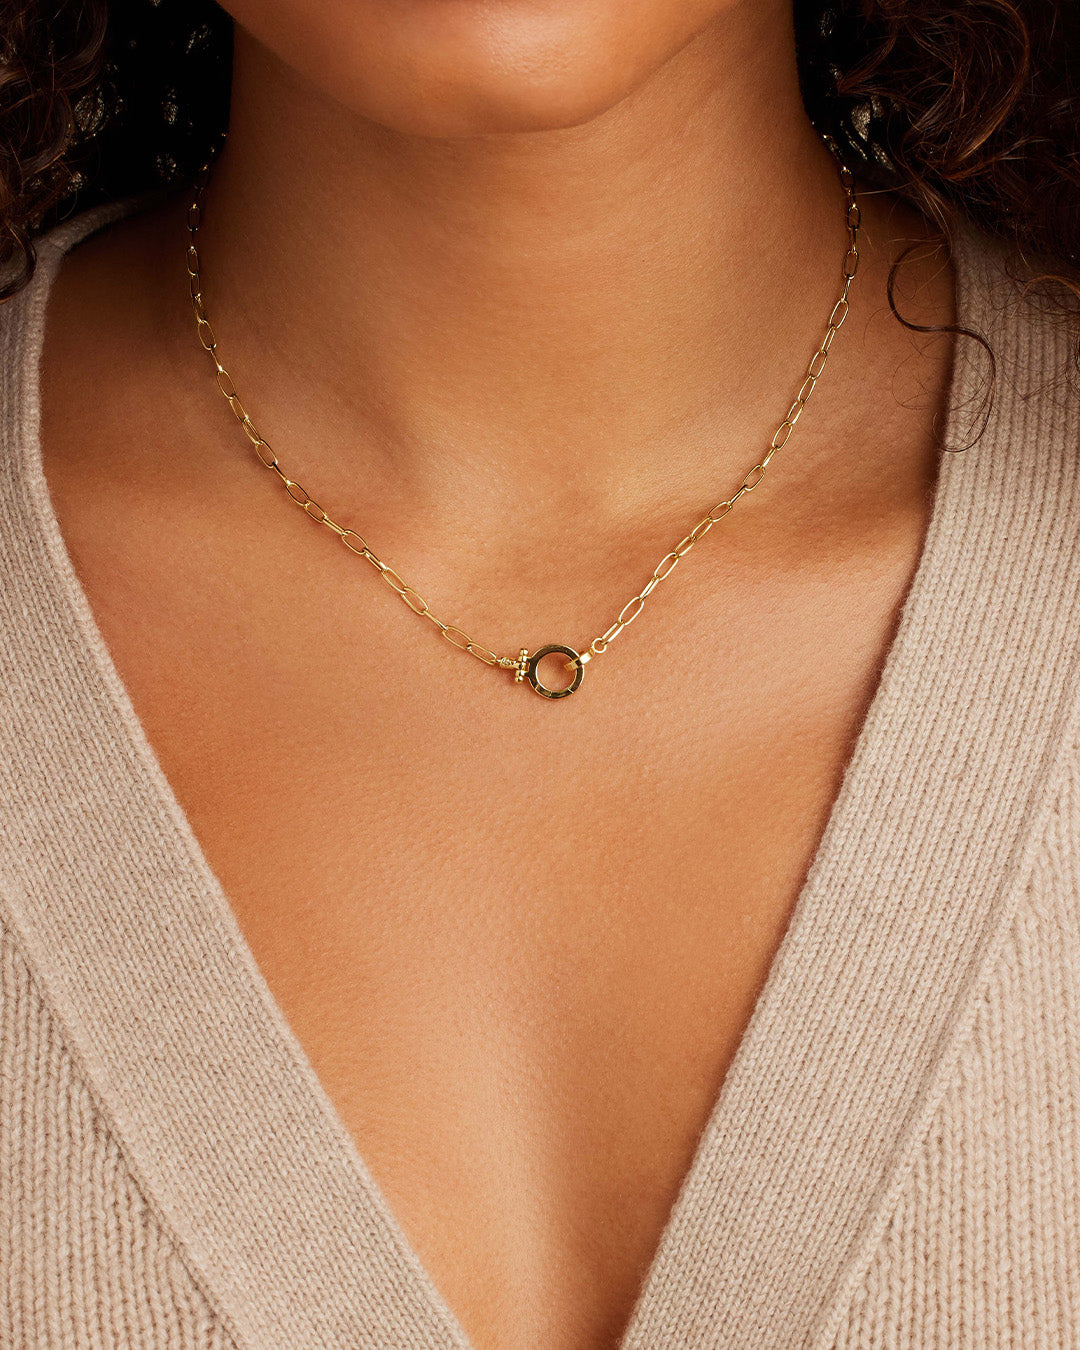 Enzo Layering Set Necklace in Gold Plated, Women's by Gorjana